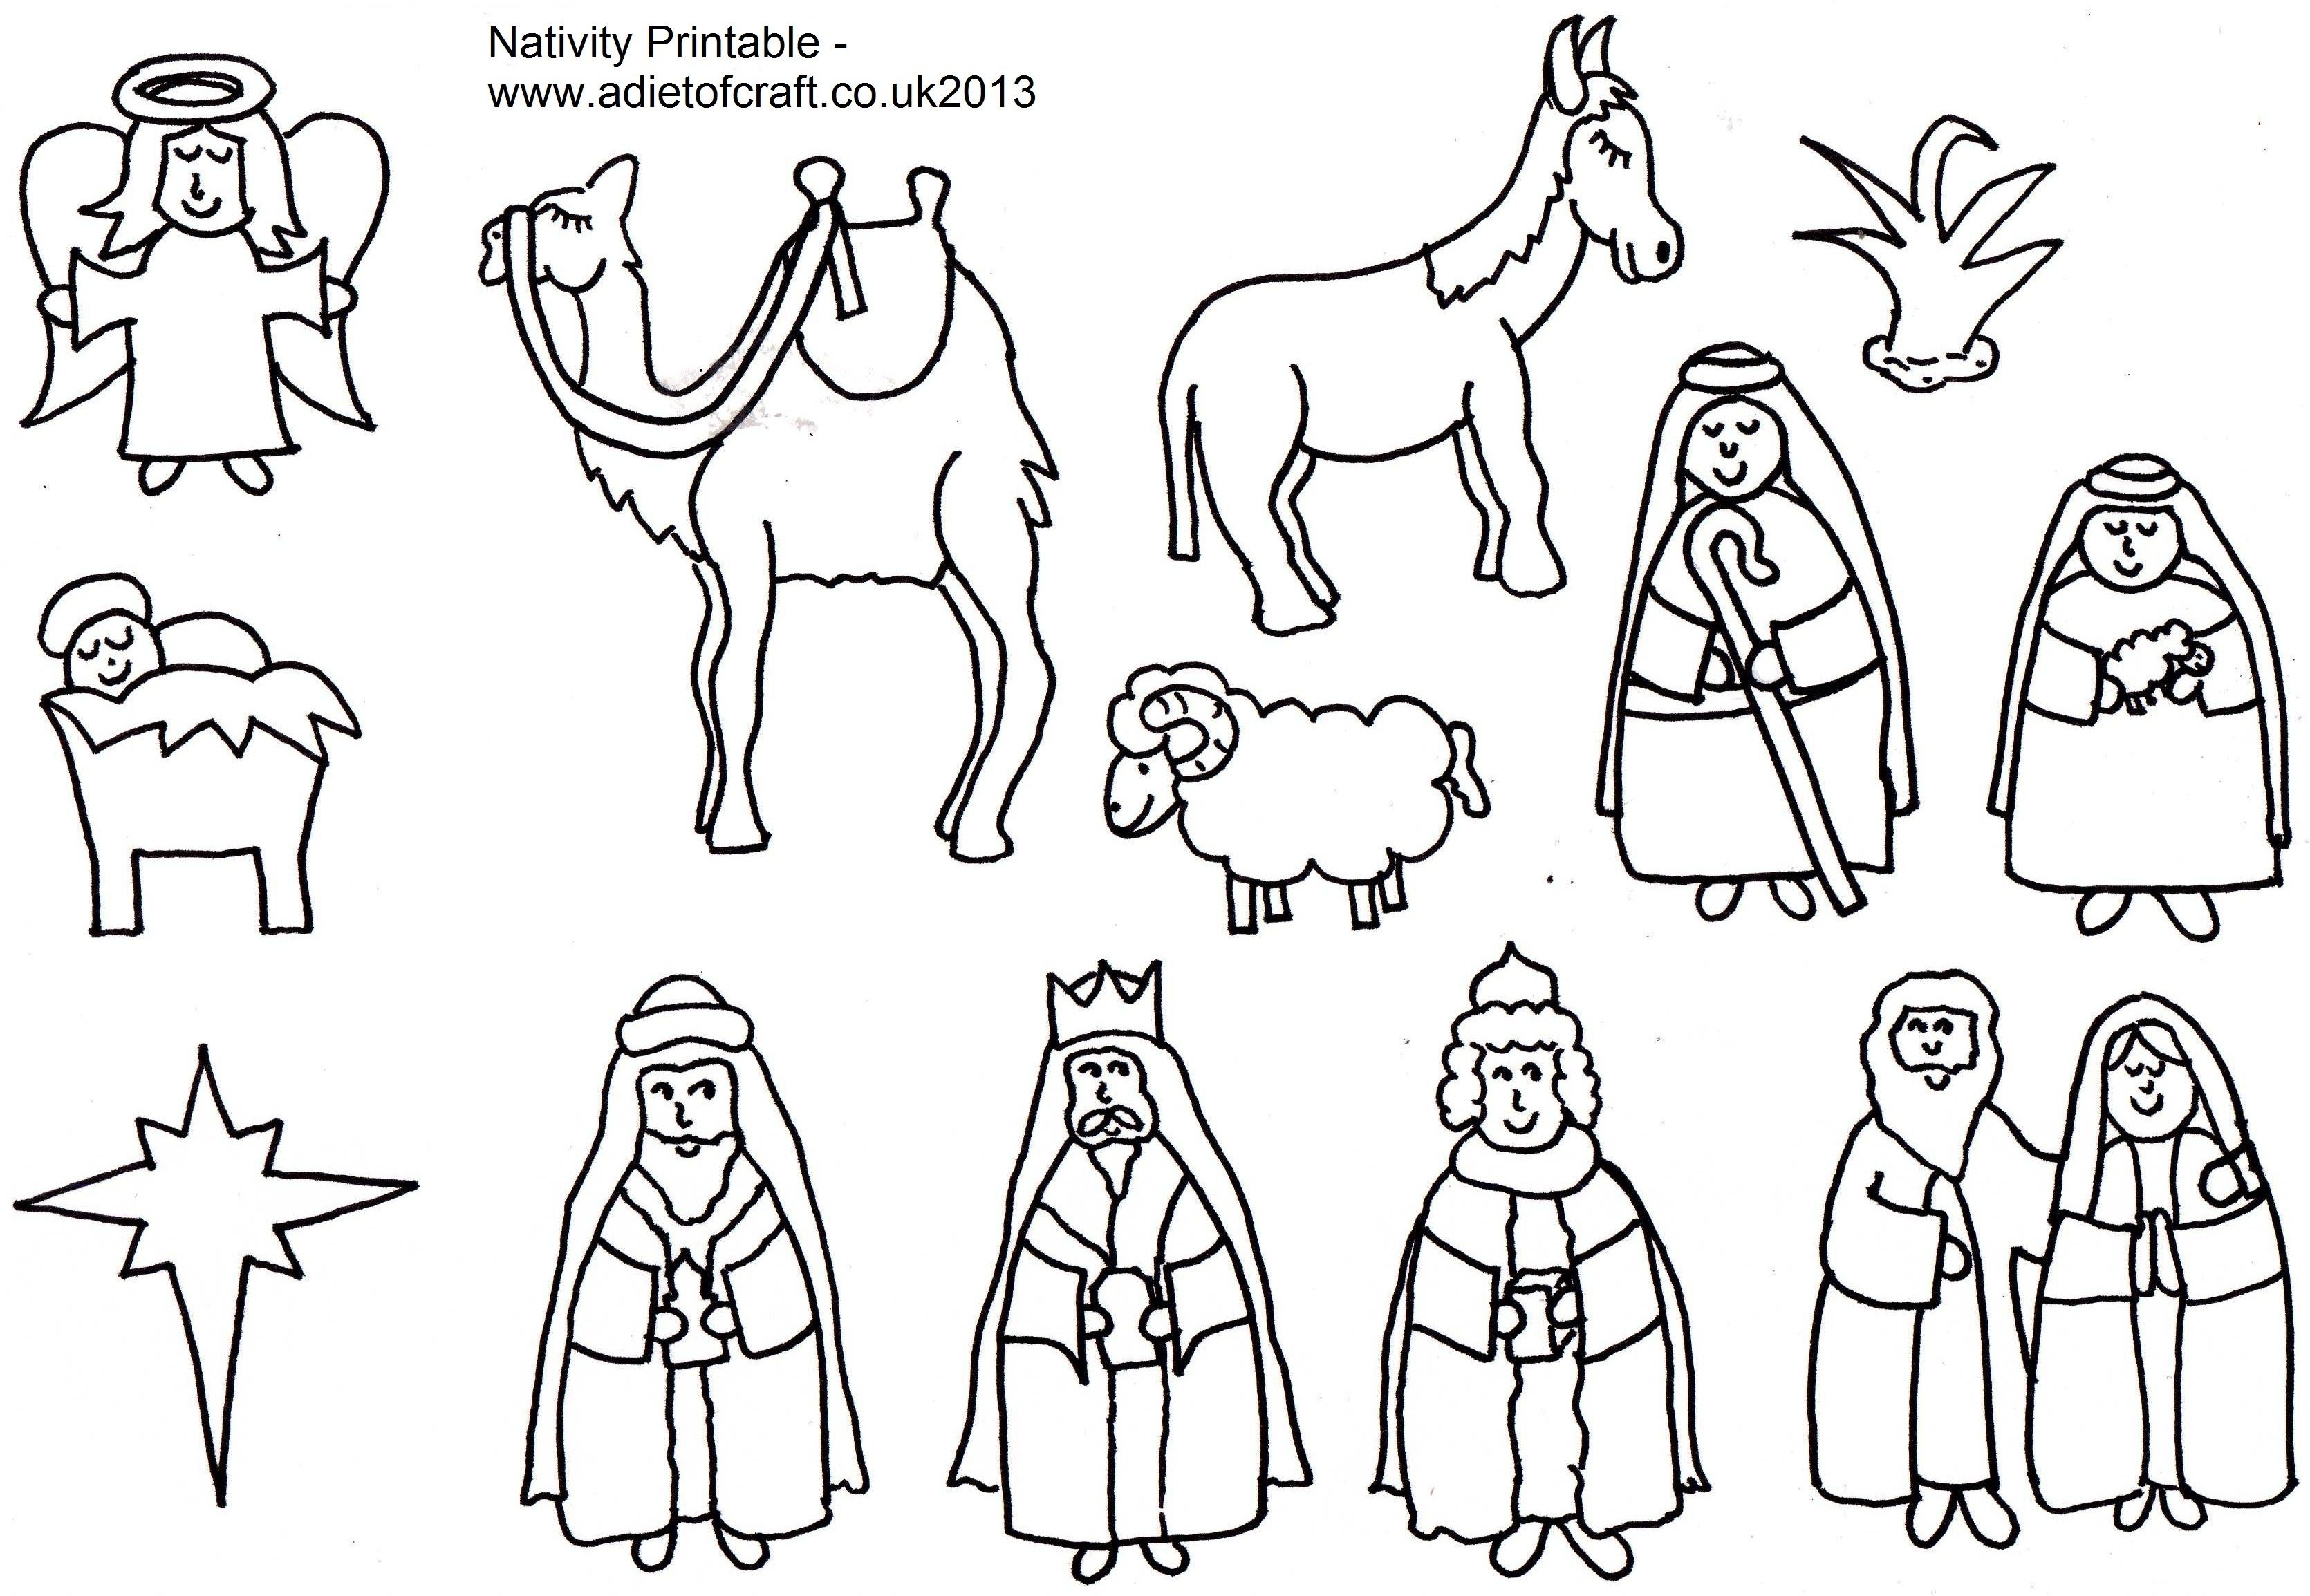 Adult Coloring Pages Of The Nativity Free In Nativity Coloring Pages - Free Printable Nativity Scene Pictures